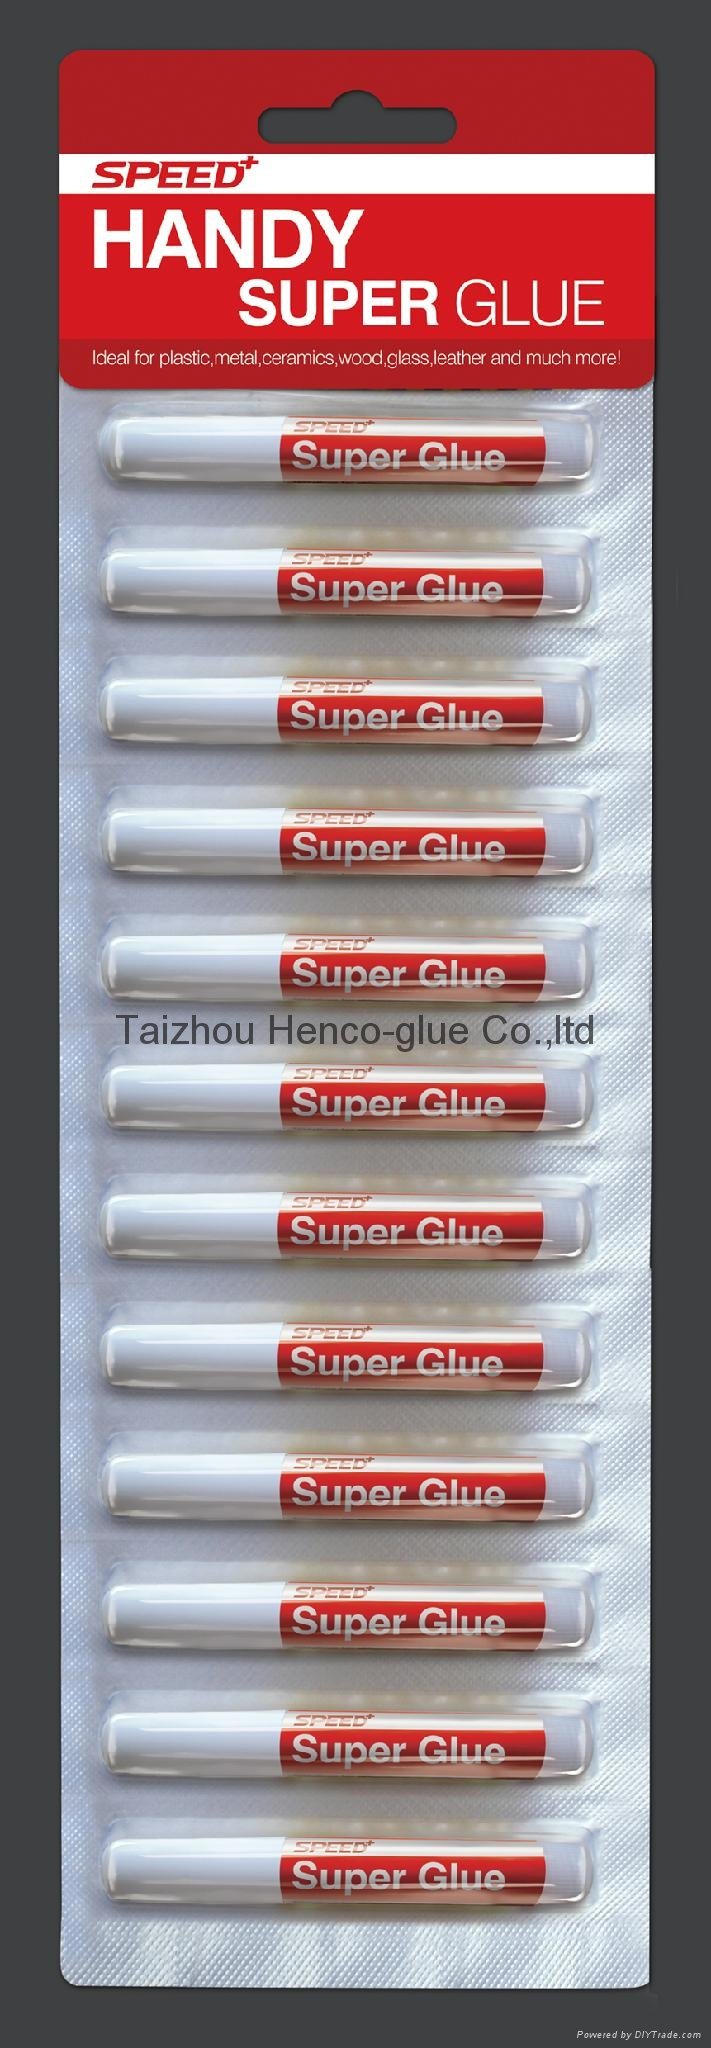 2g Handy Super Strong Glue Packed On Foil Sheet